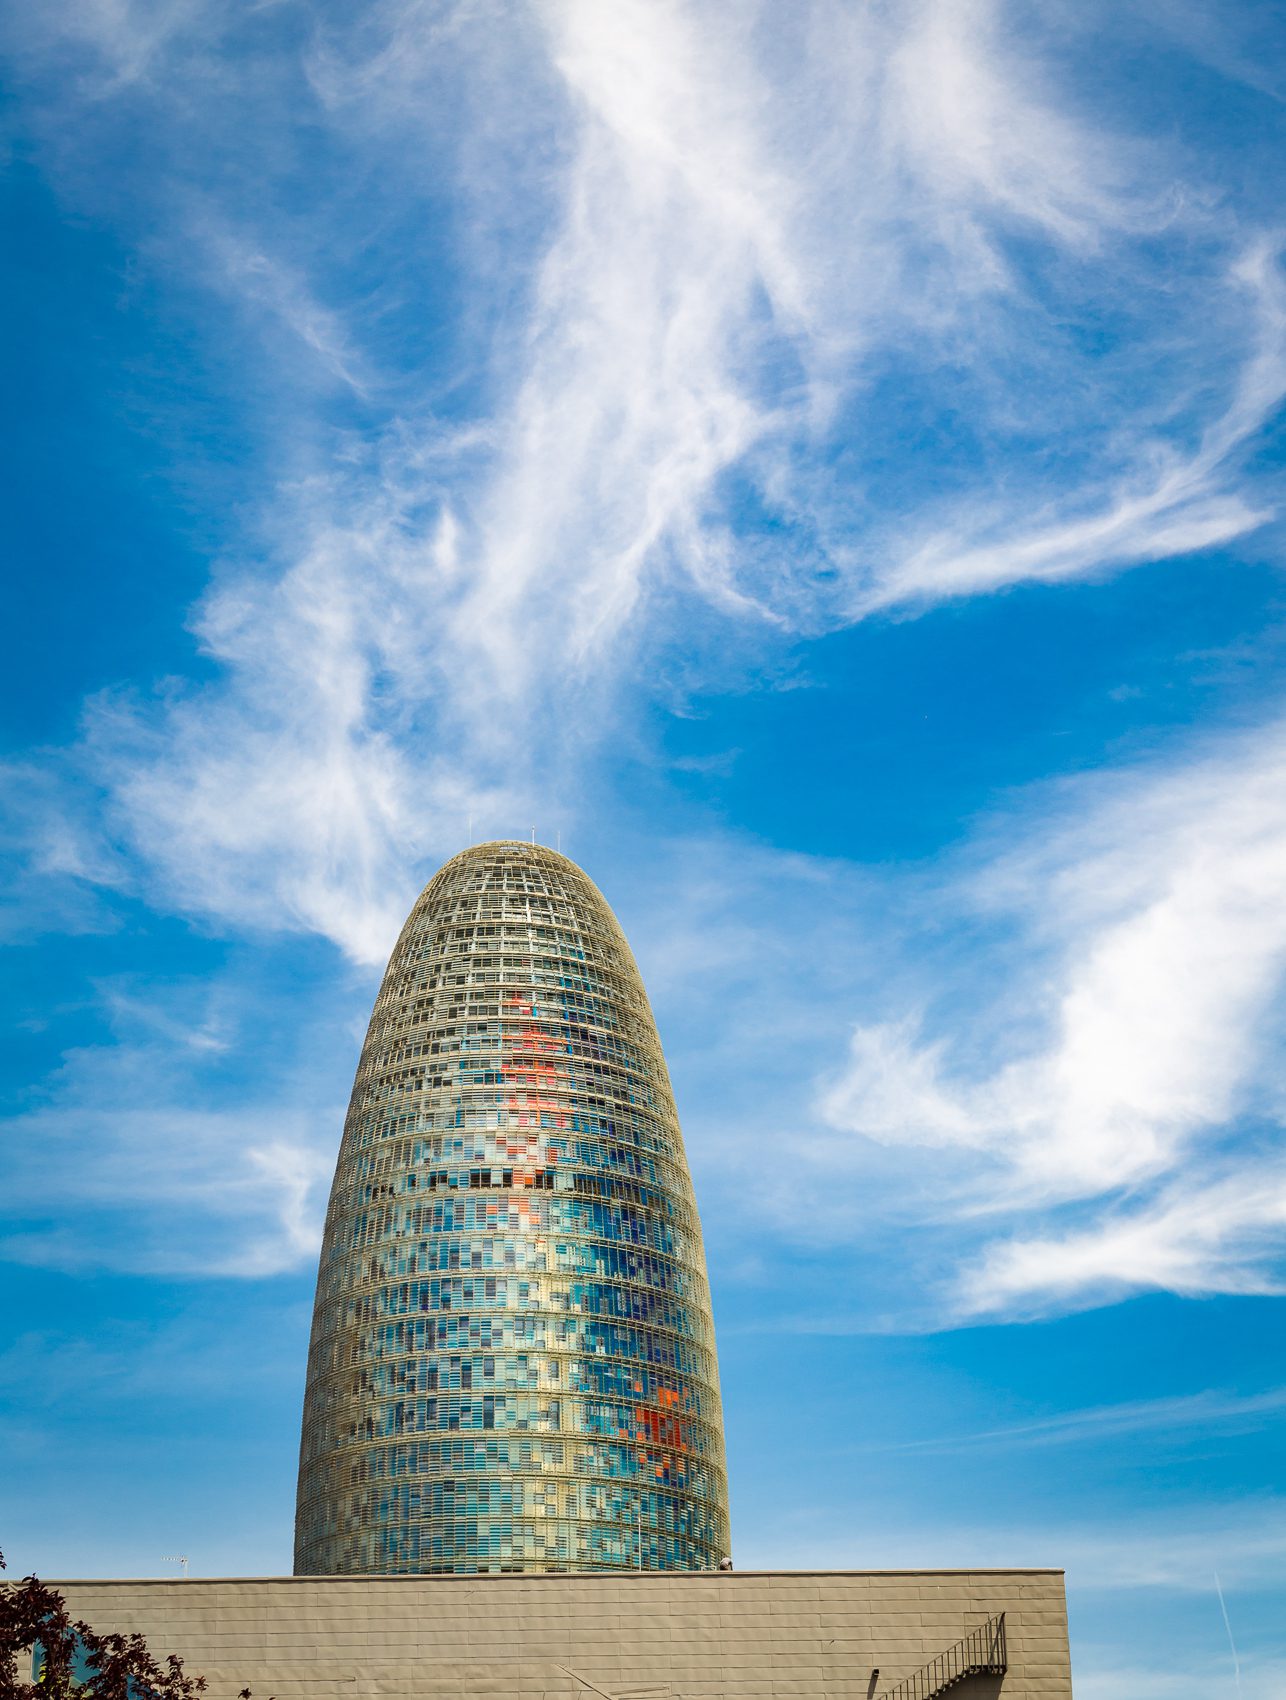 Upper part of the Agbar Tower, Barcelona, Spain. BC018